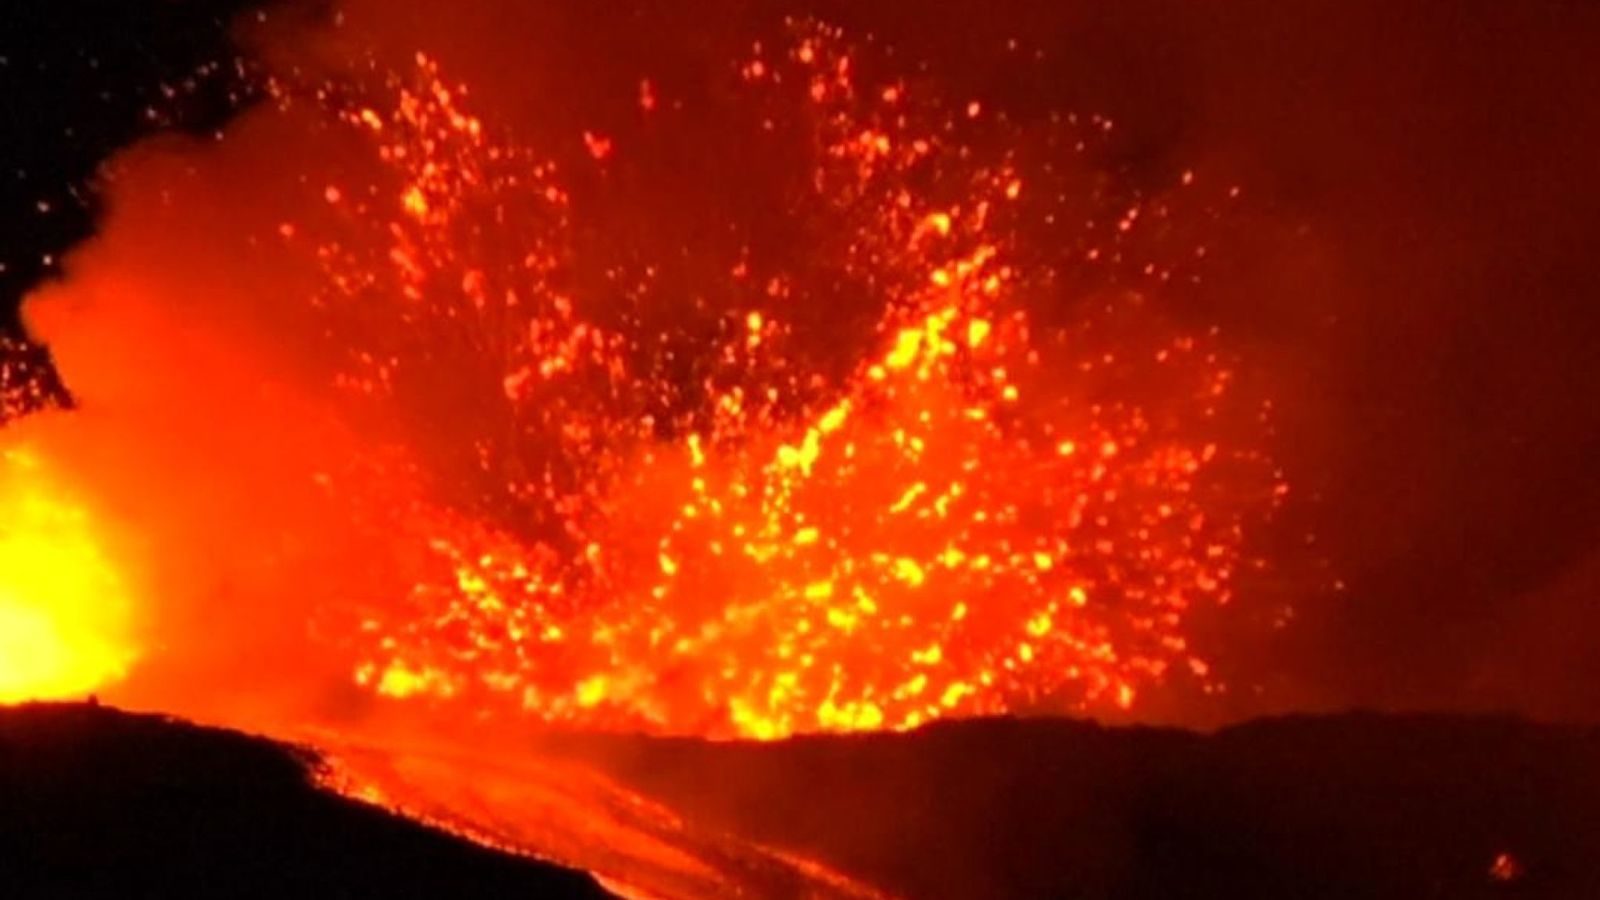 Lava flows from Mount Etna in spectacular display